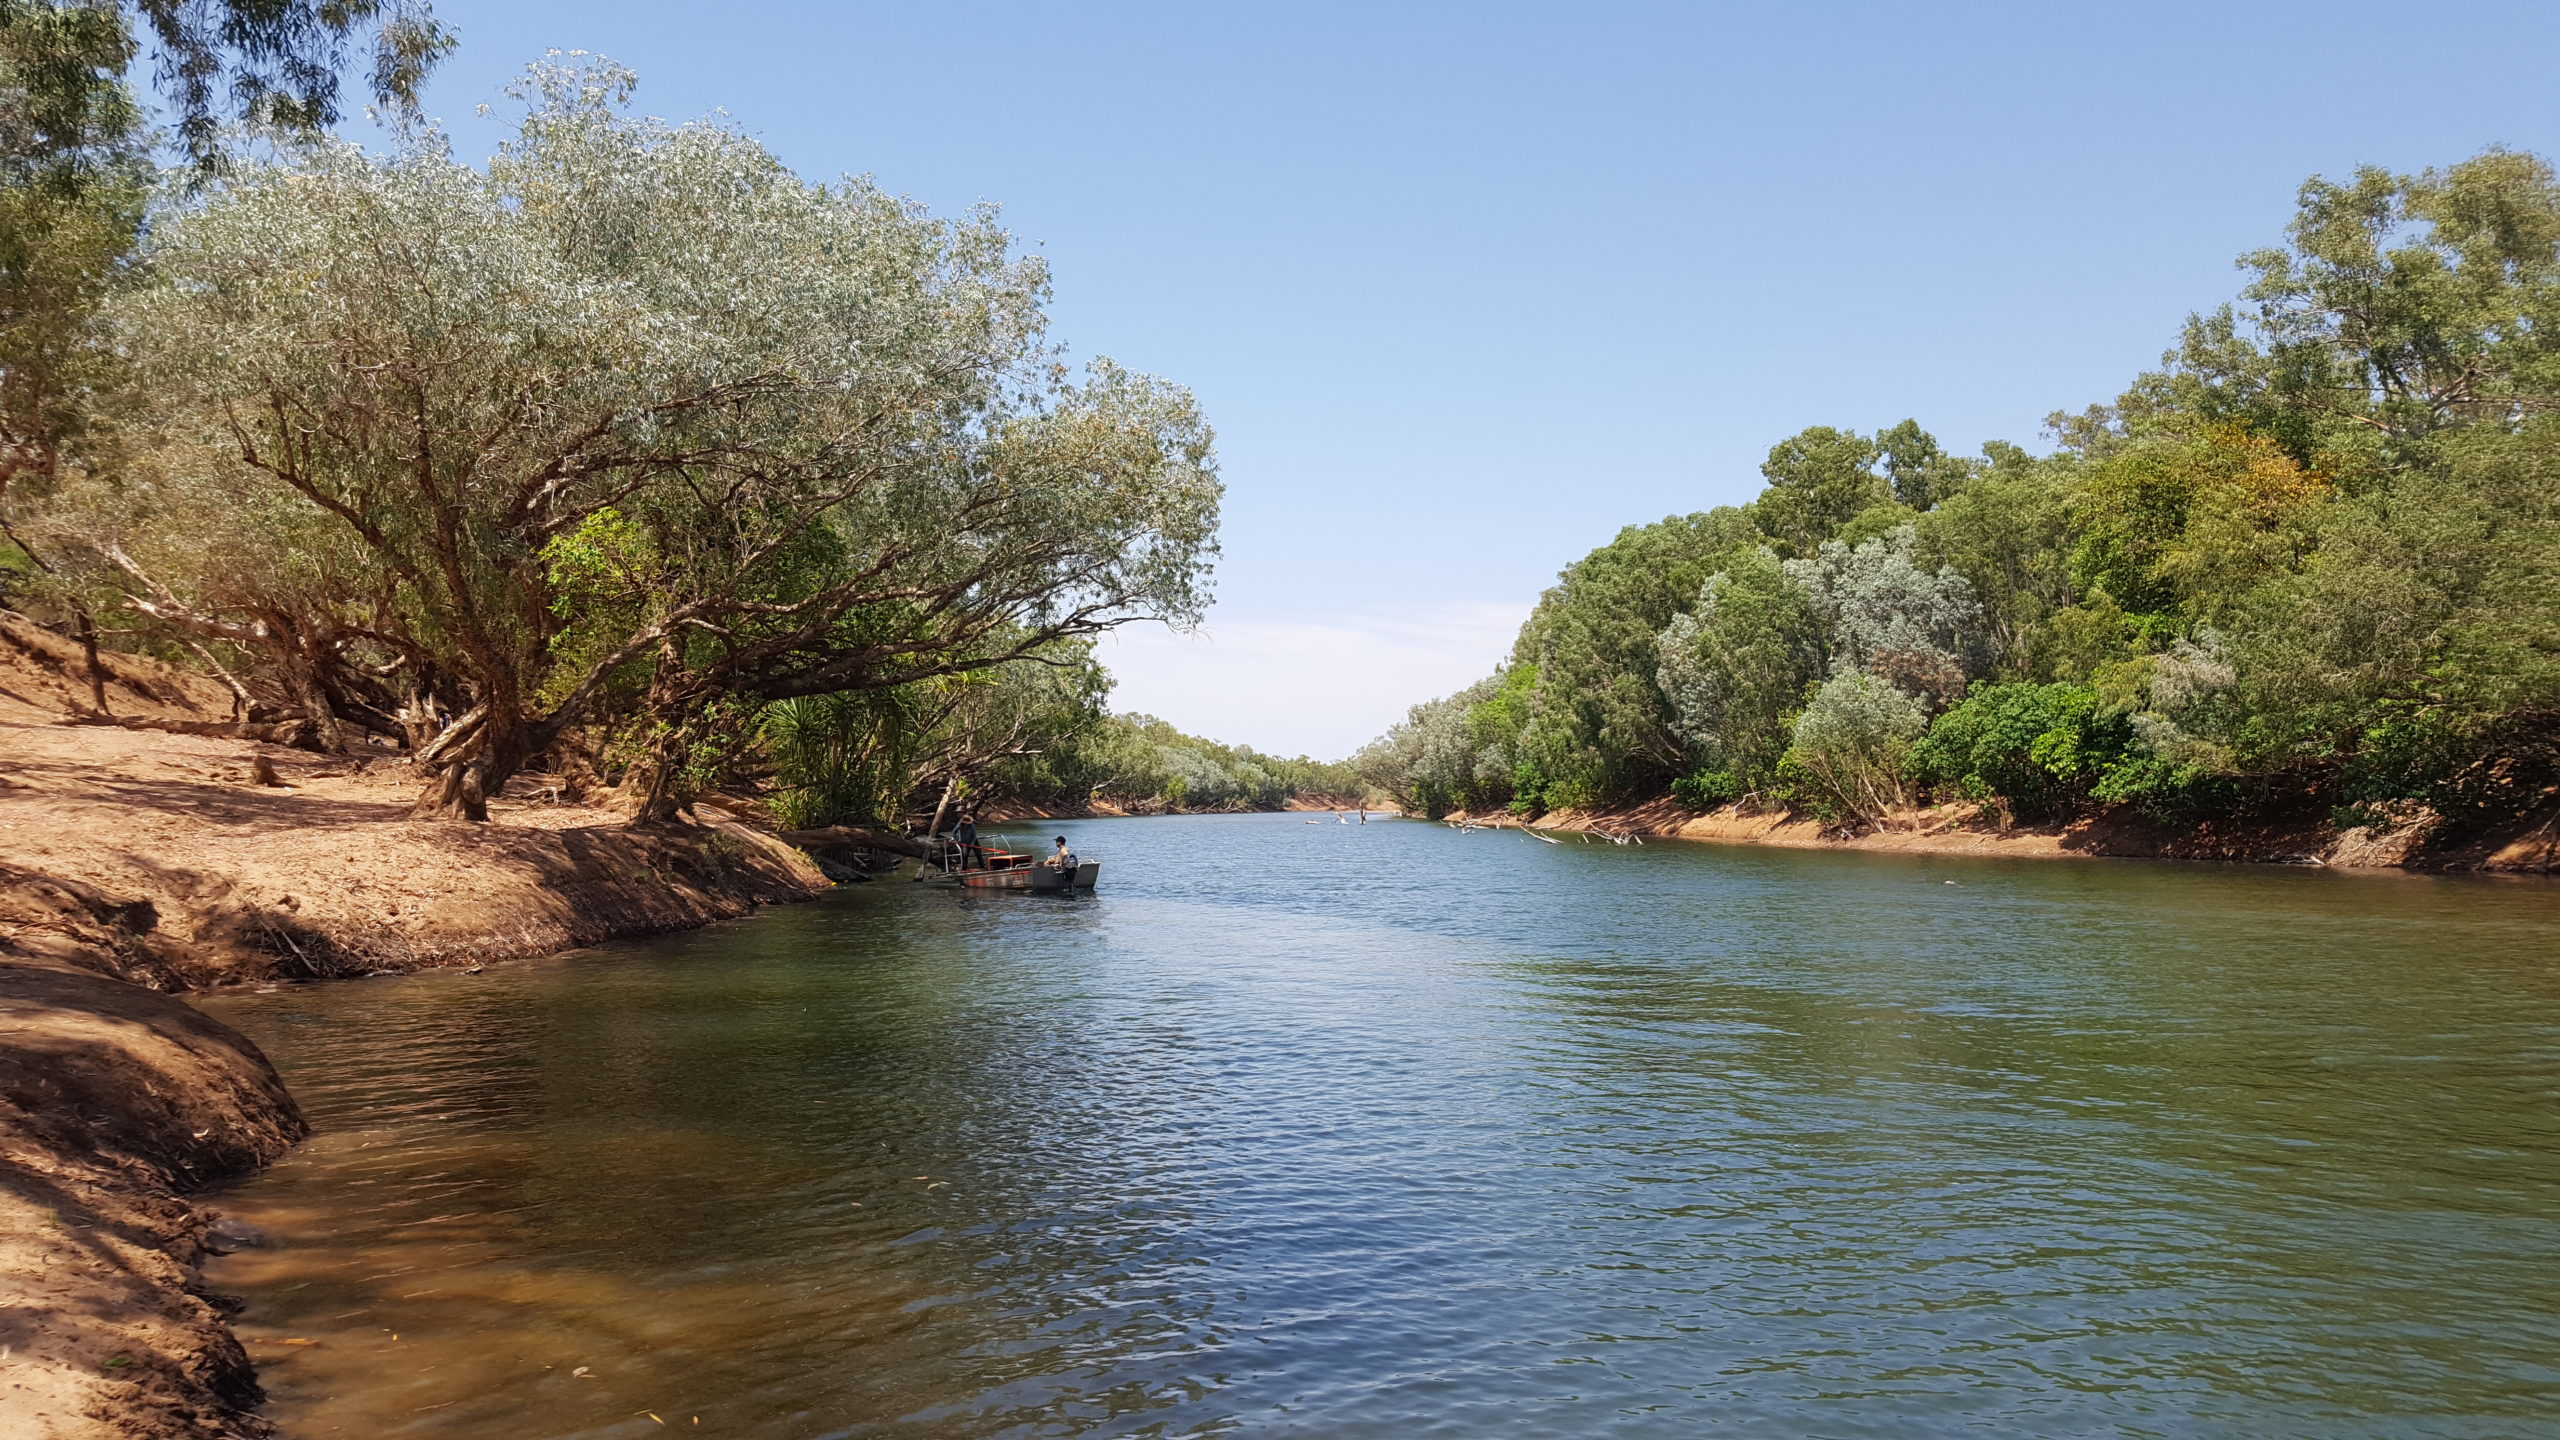 Fitzroy river image from the water level